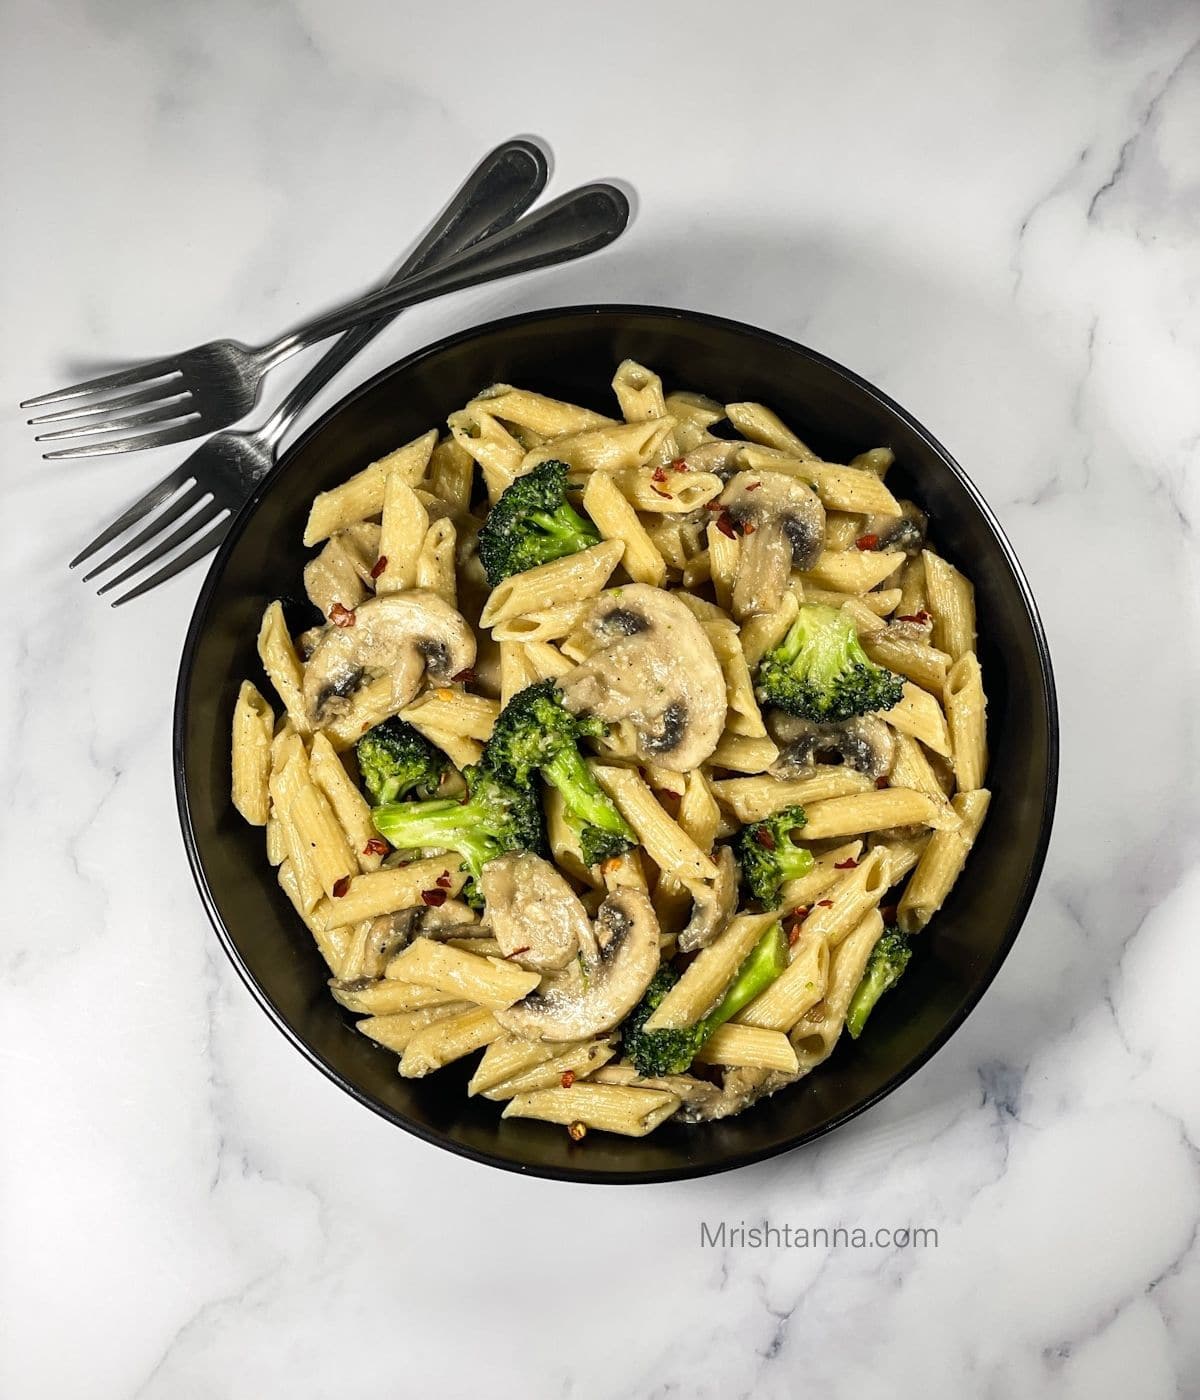 A black bowl is with vegan mushroom and broccoli pasta and fork on side.